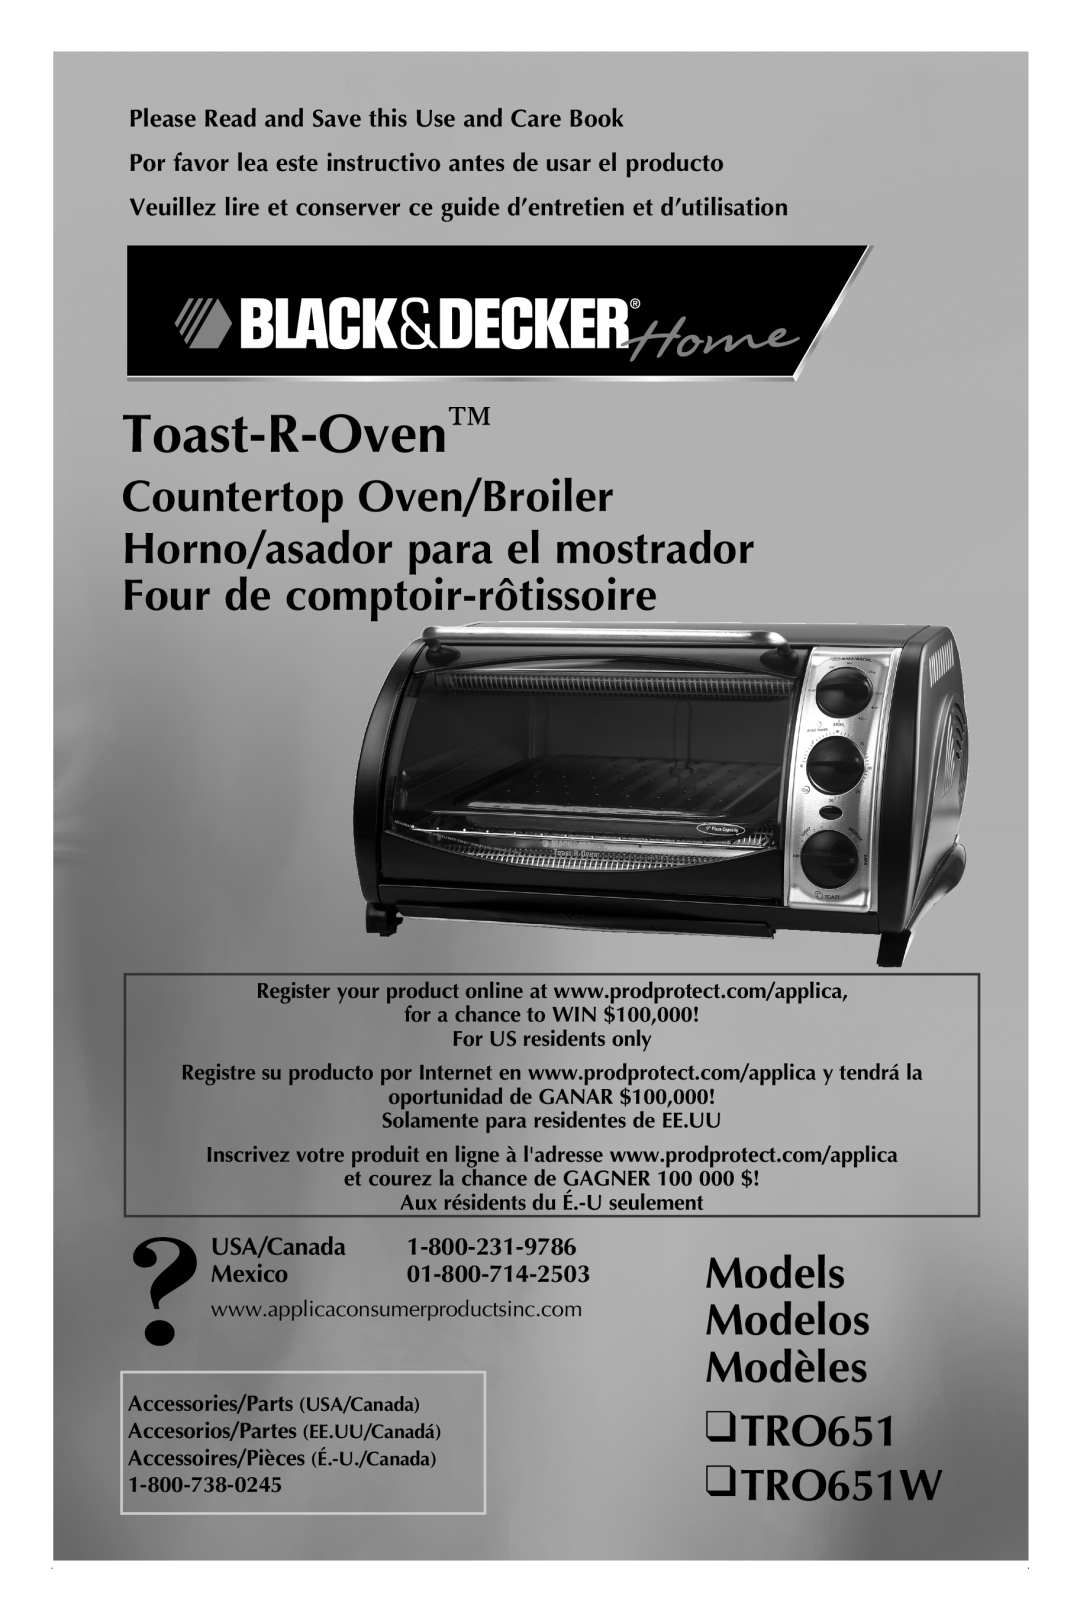 Black & Decker dimensions Models Modelos Modèles TRO651 TRO651W, Please Read and Save this Use and Care Book 